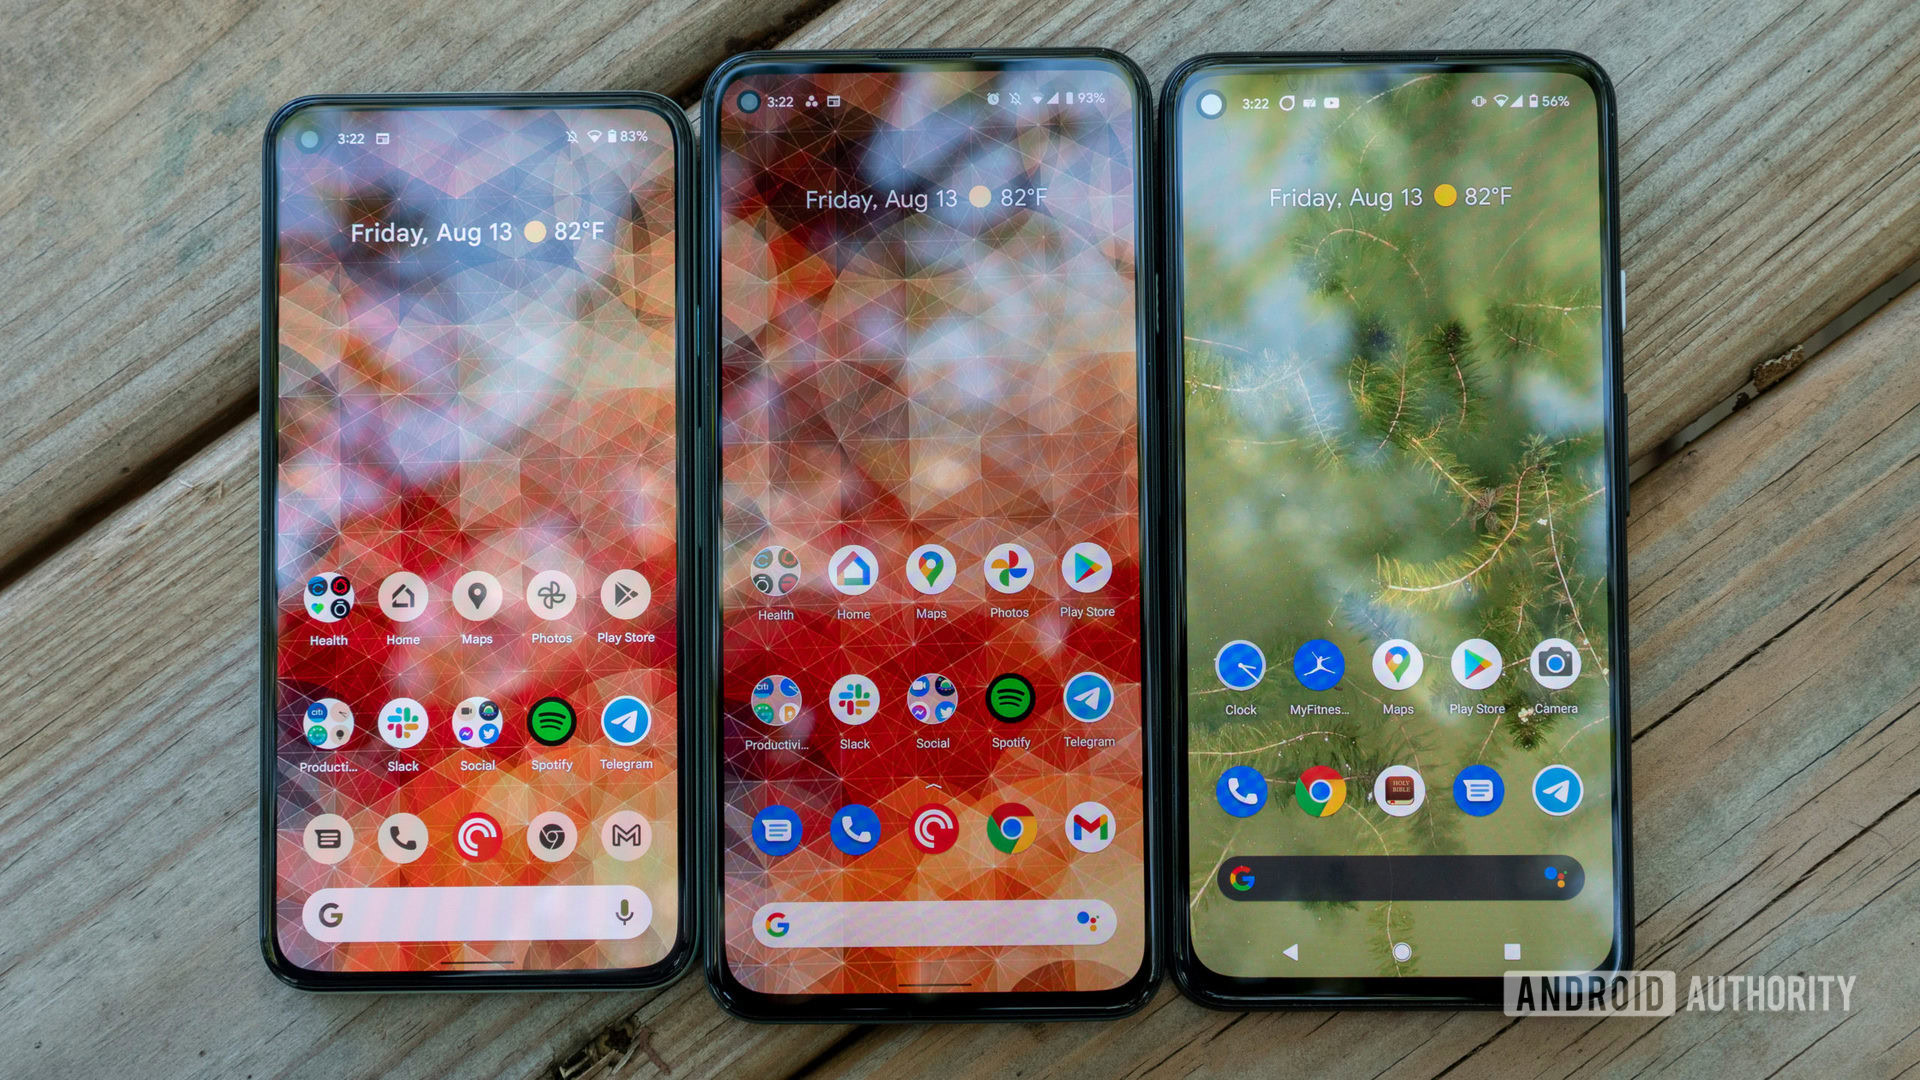 Google Pixel 5a review: Still great, but it's not the Pixel 6